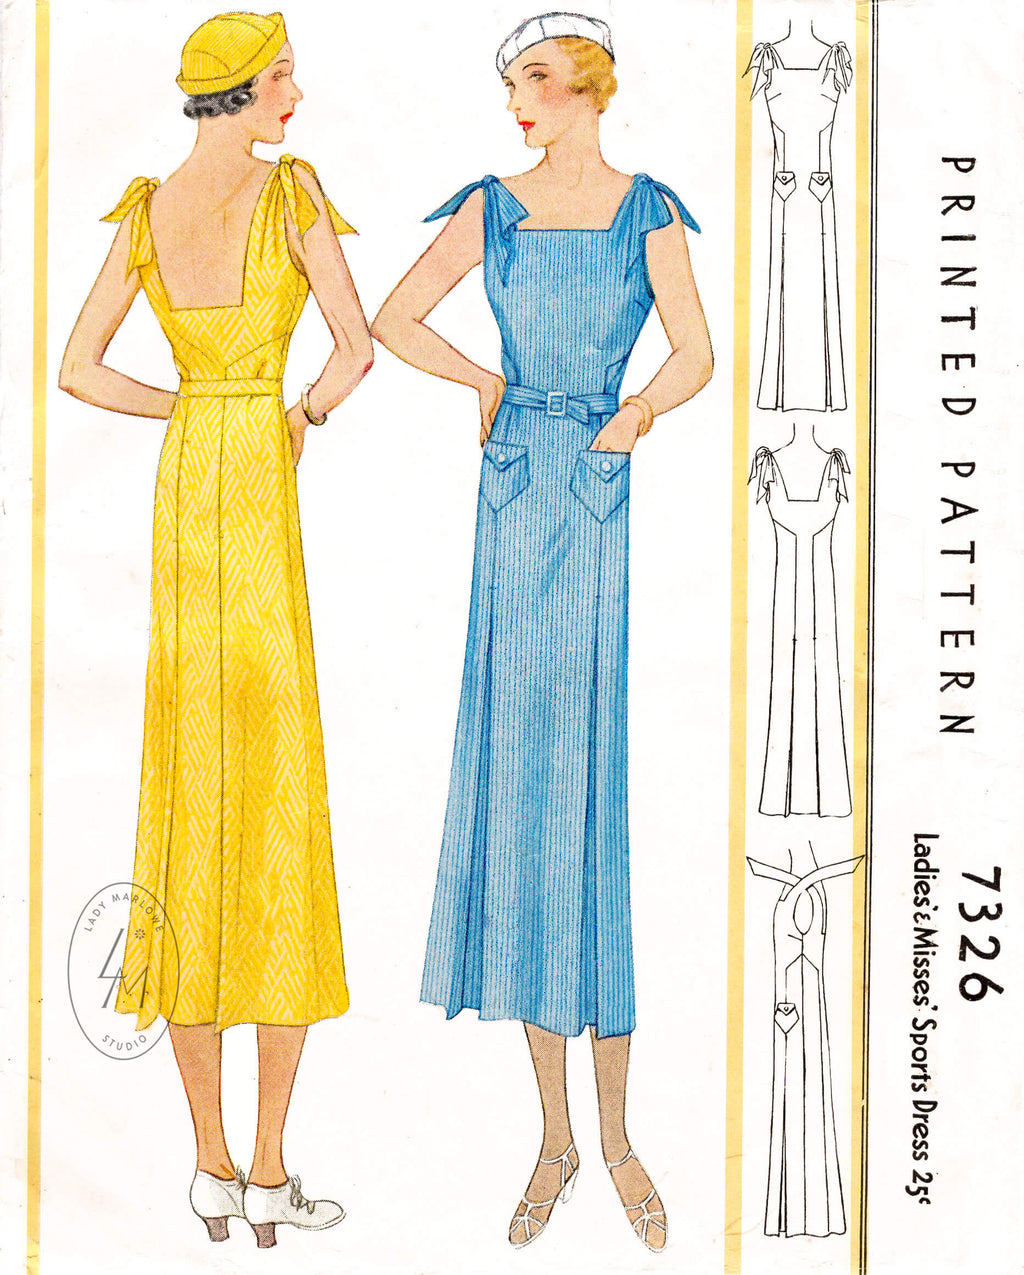 McCall 7326 1930s 1932 vintage dress sewing pattern